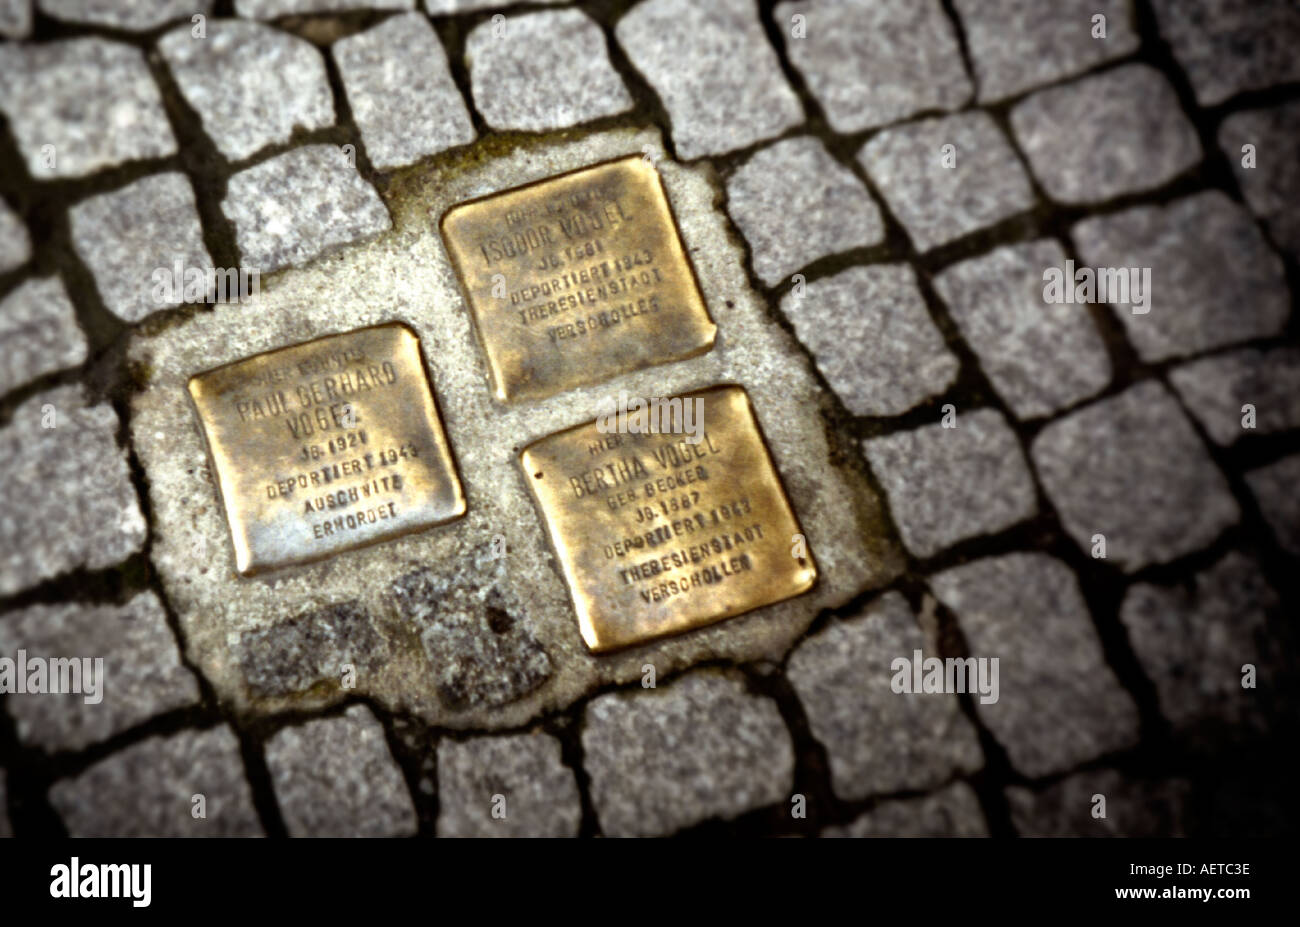 Holocaust memorial plaques (Stolperstein) for Jewish victims of the Nazis in WW2 embedded in the pavement in Hackescher Markt, Berlin, Germany Stock Photo